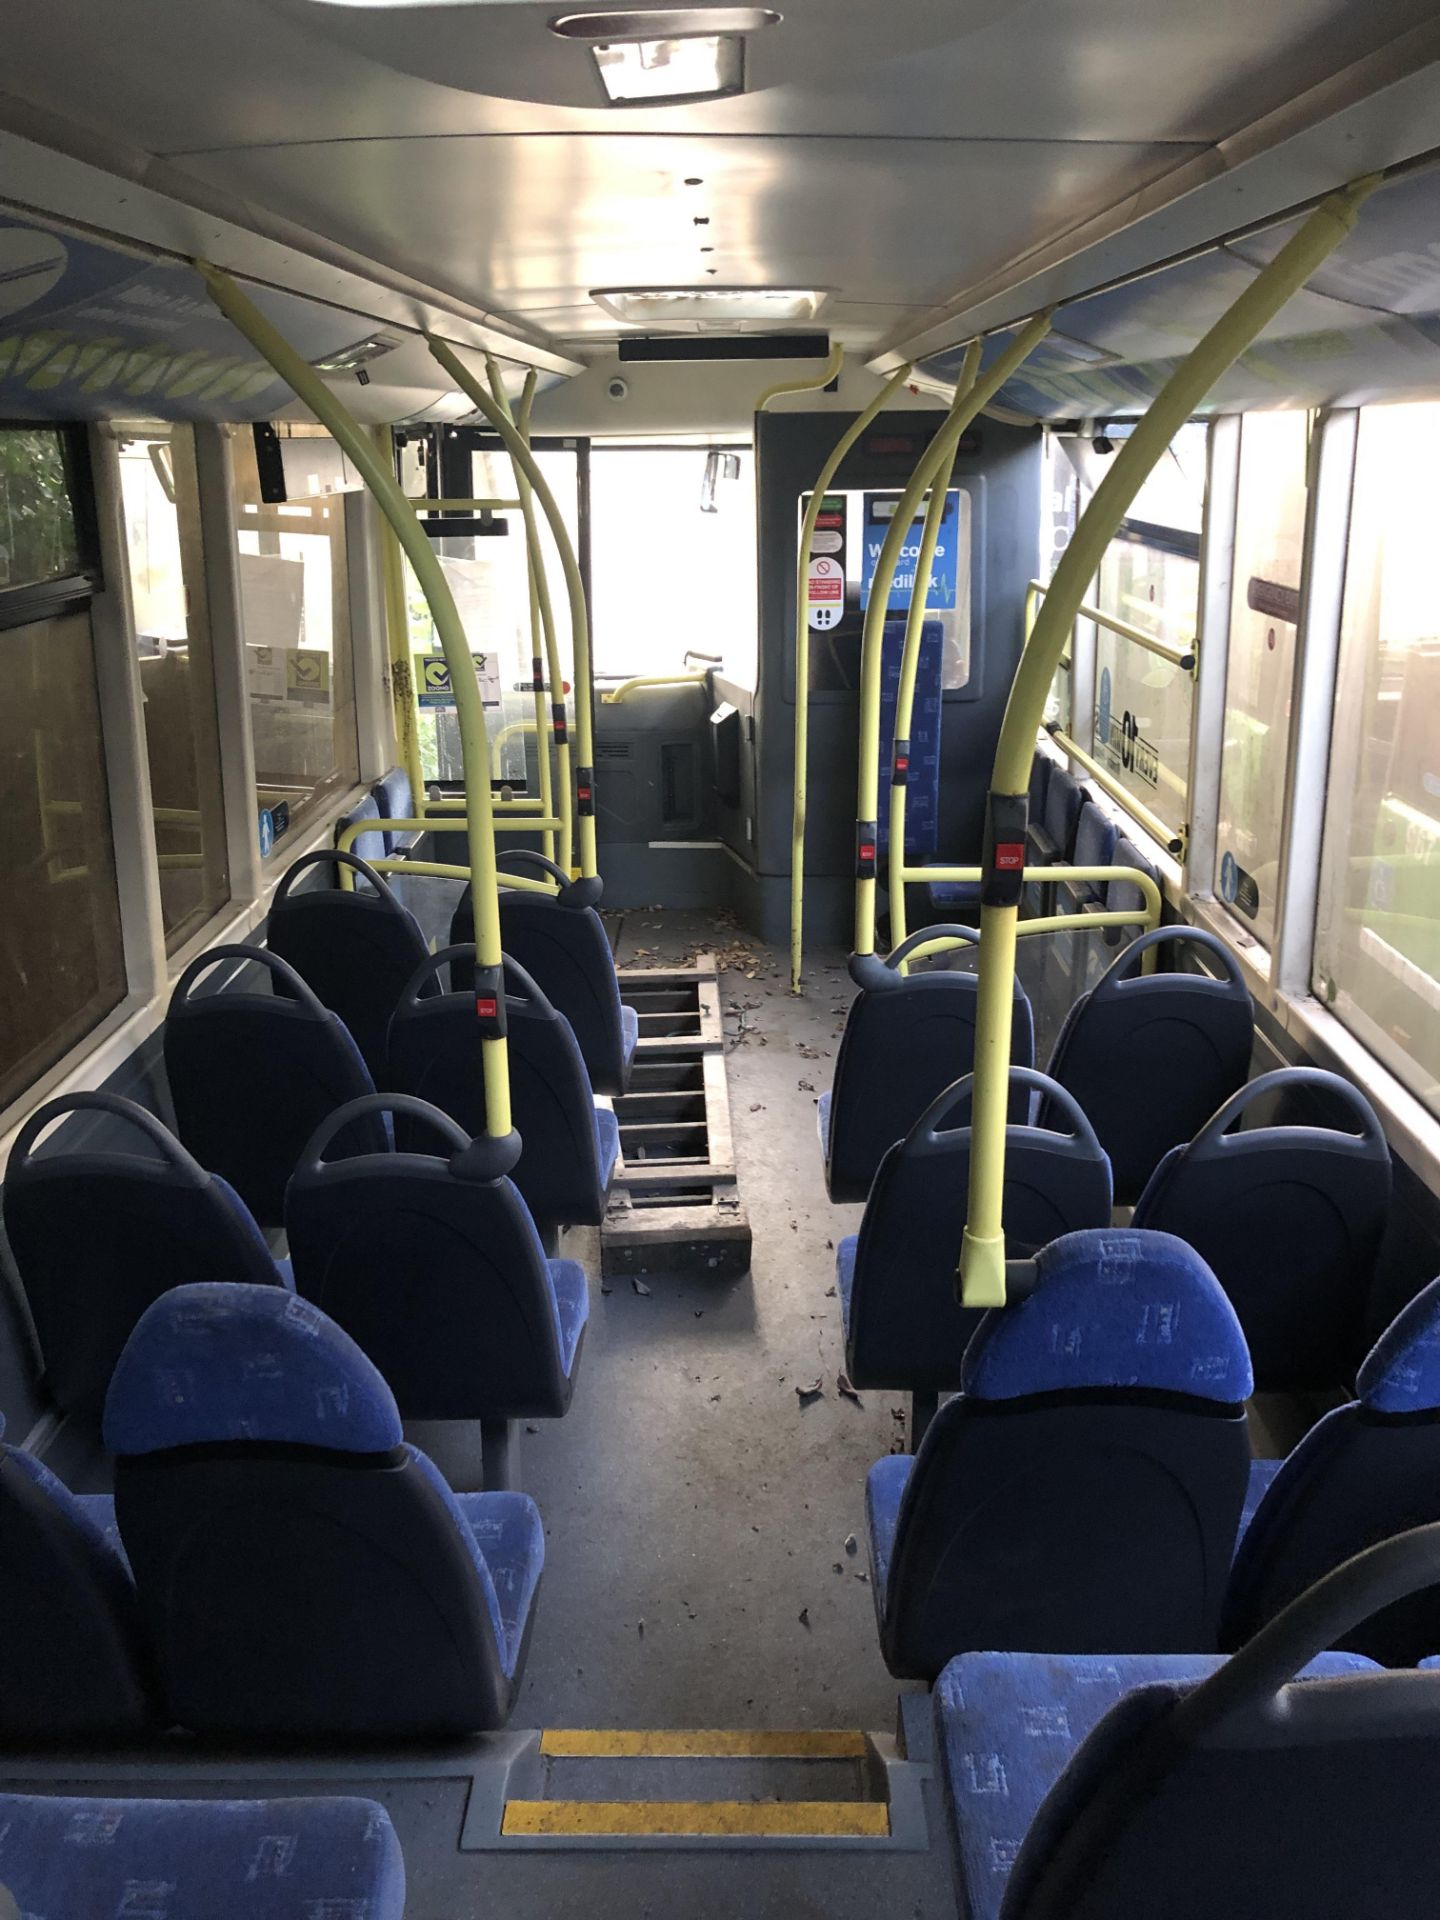 2012(62) OPTARE SOLO M950 ELECTRIC BUS - 31 SEATS / 12 STANDING - 9.5 METRES LONG *PLUS VAT* - Image 20 of 22